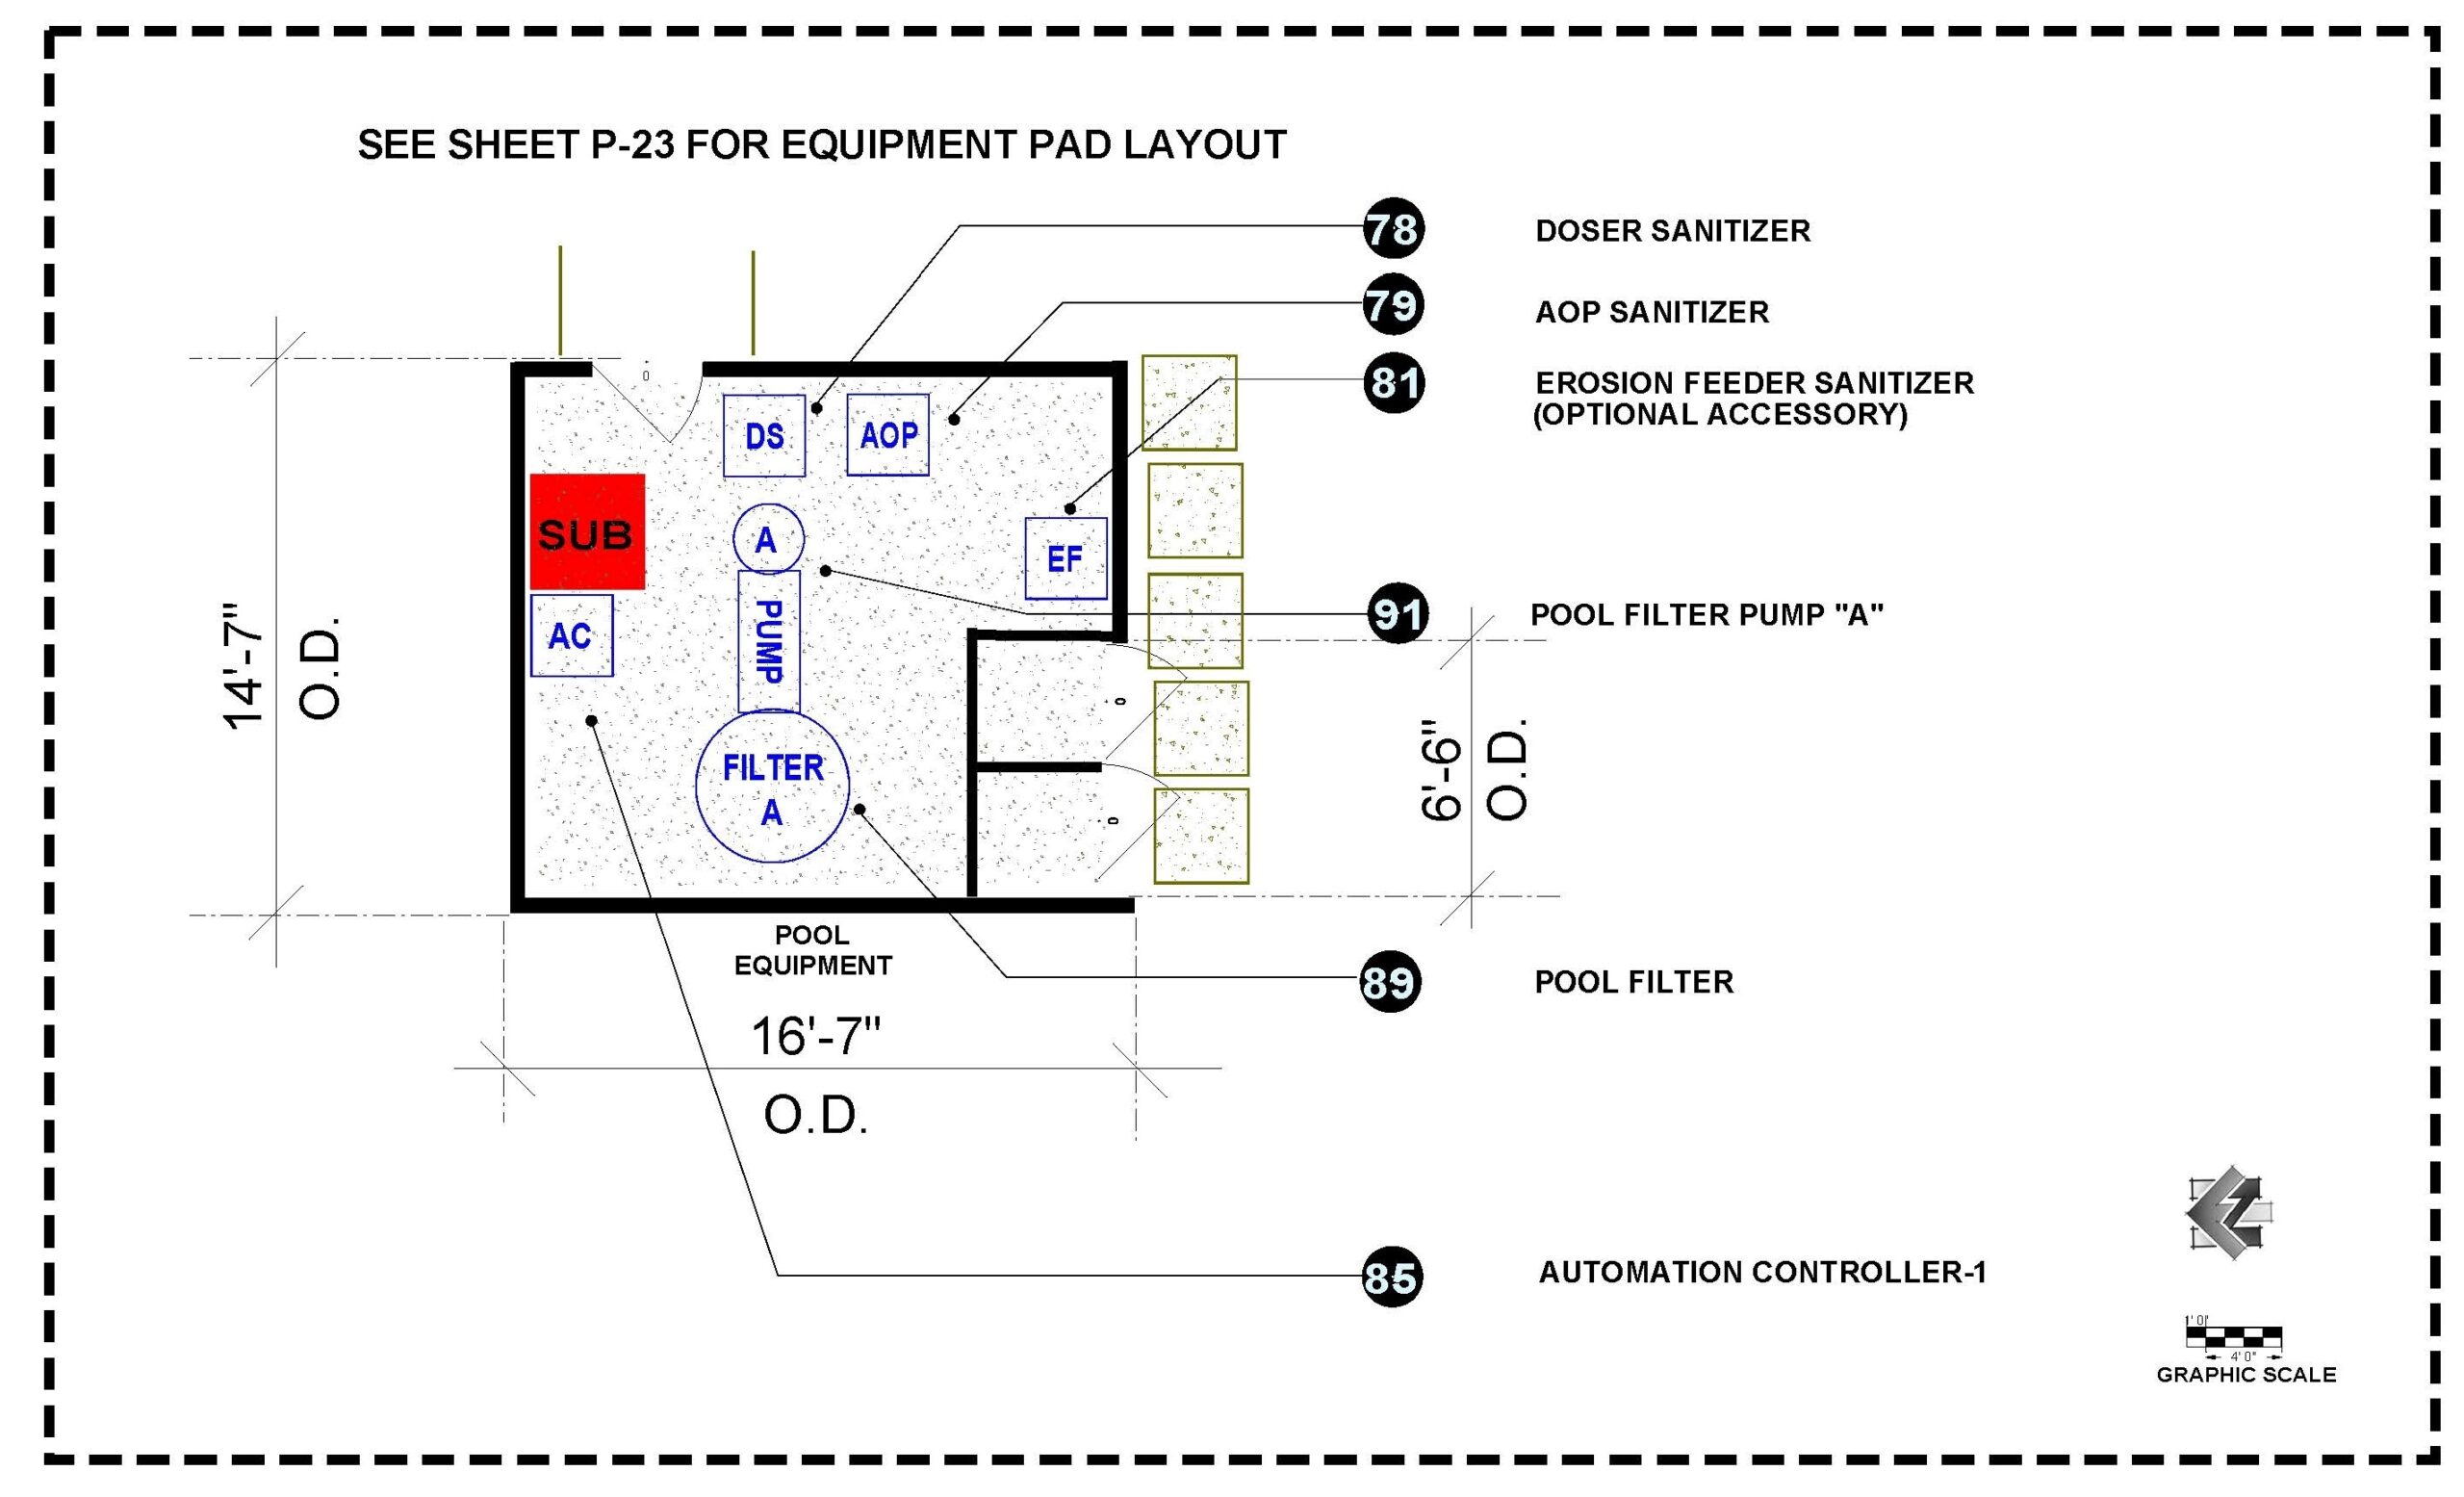 PRELIMINARY EQUIPMENT PAD LAYOUT 6-30-23